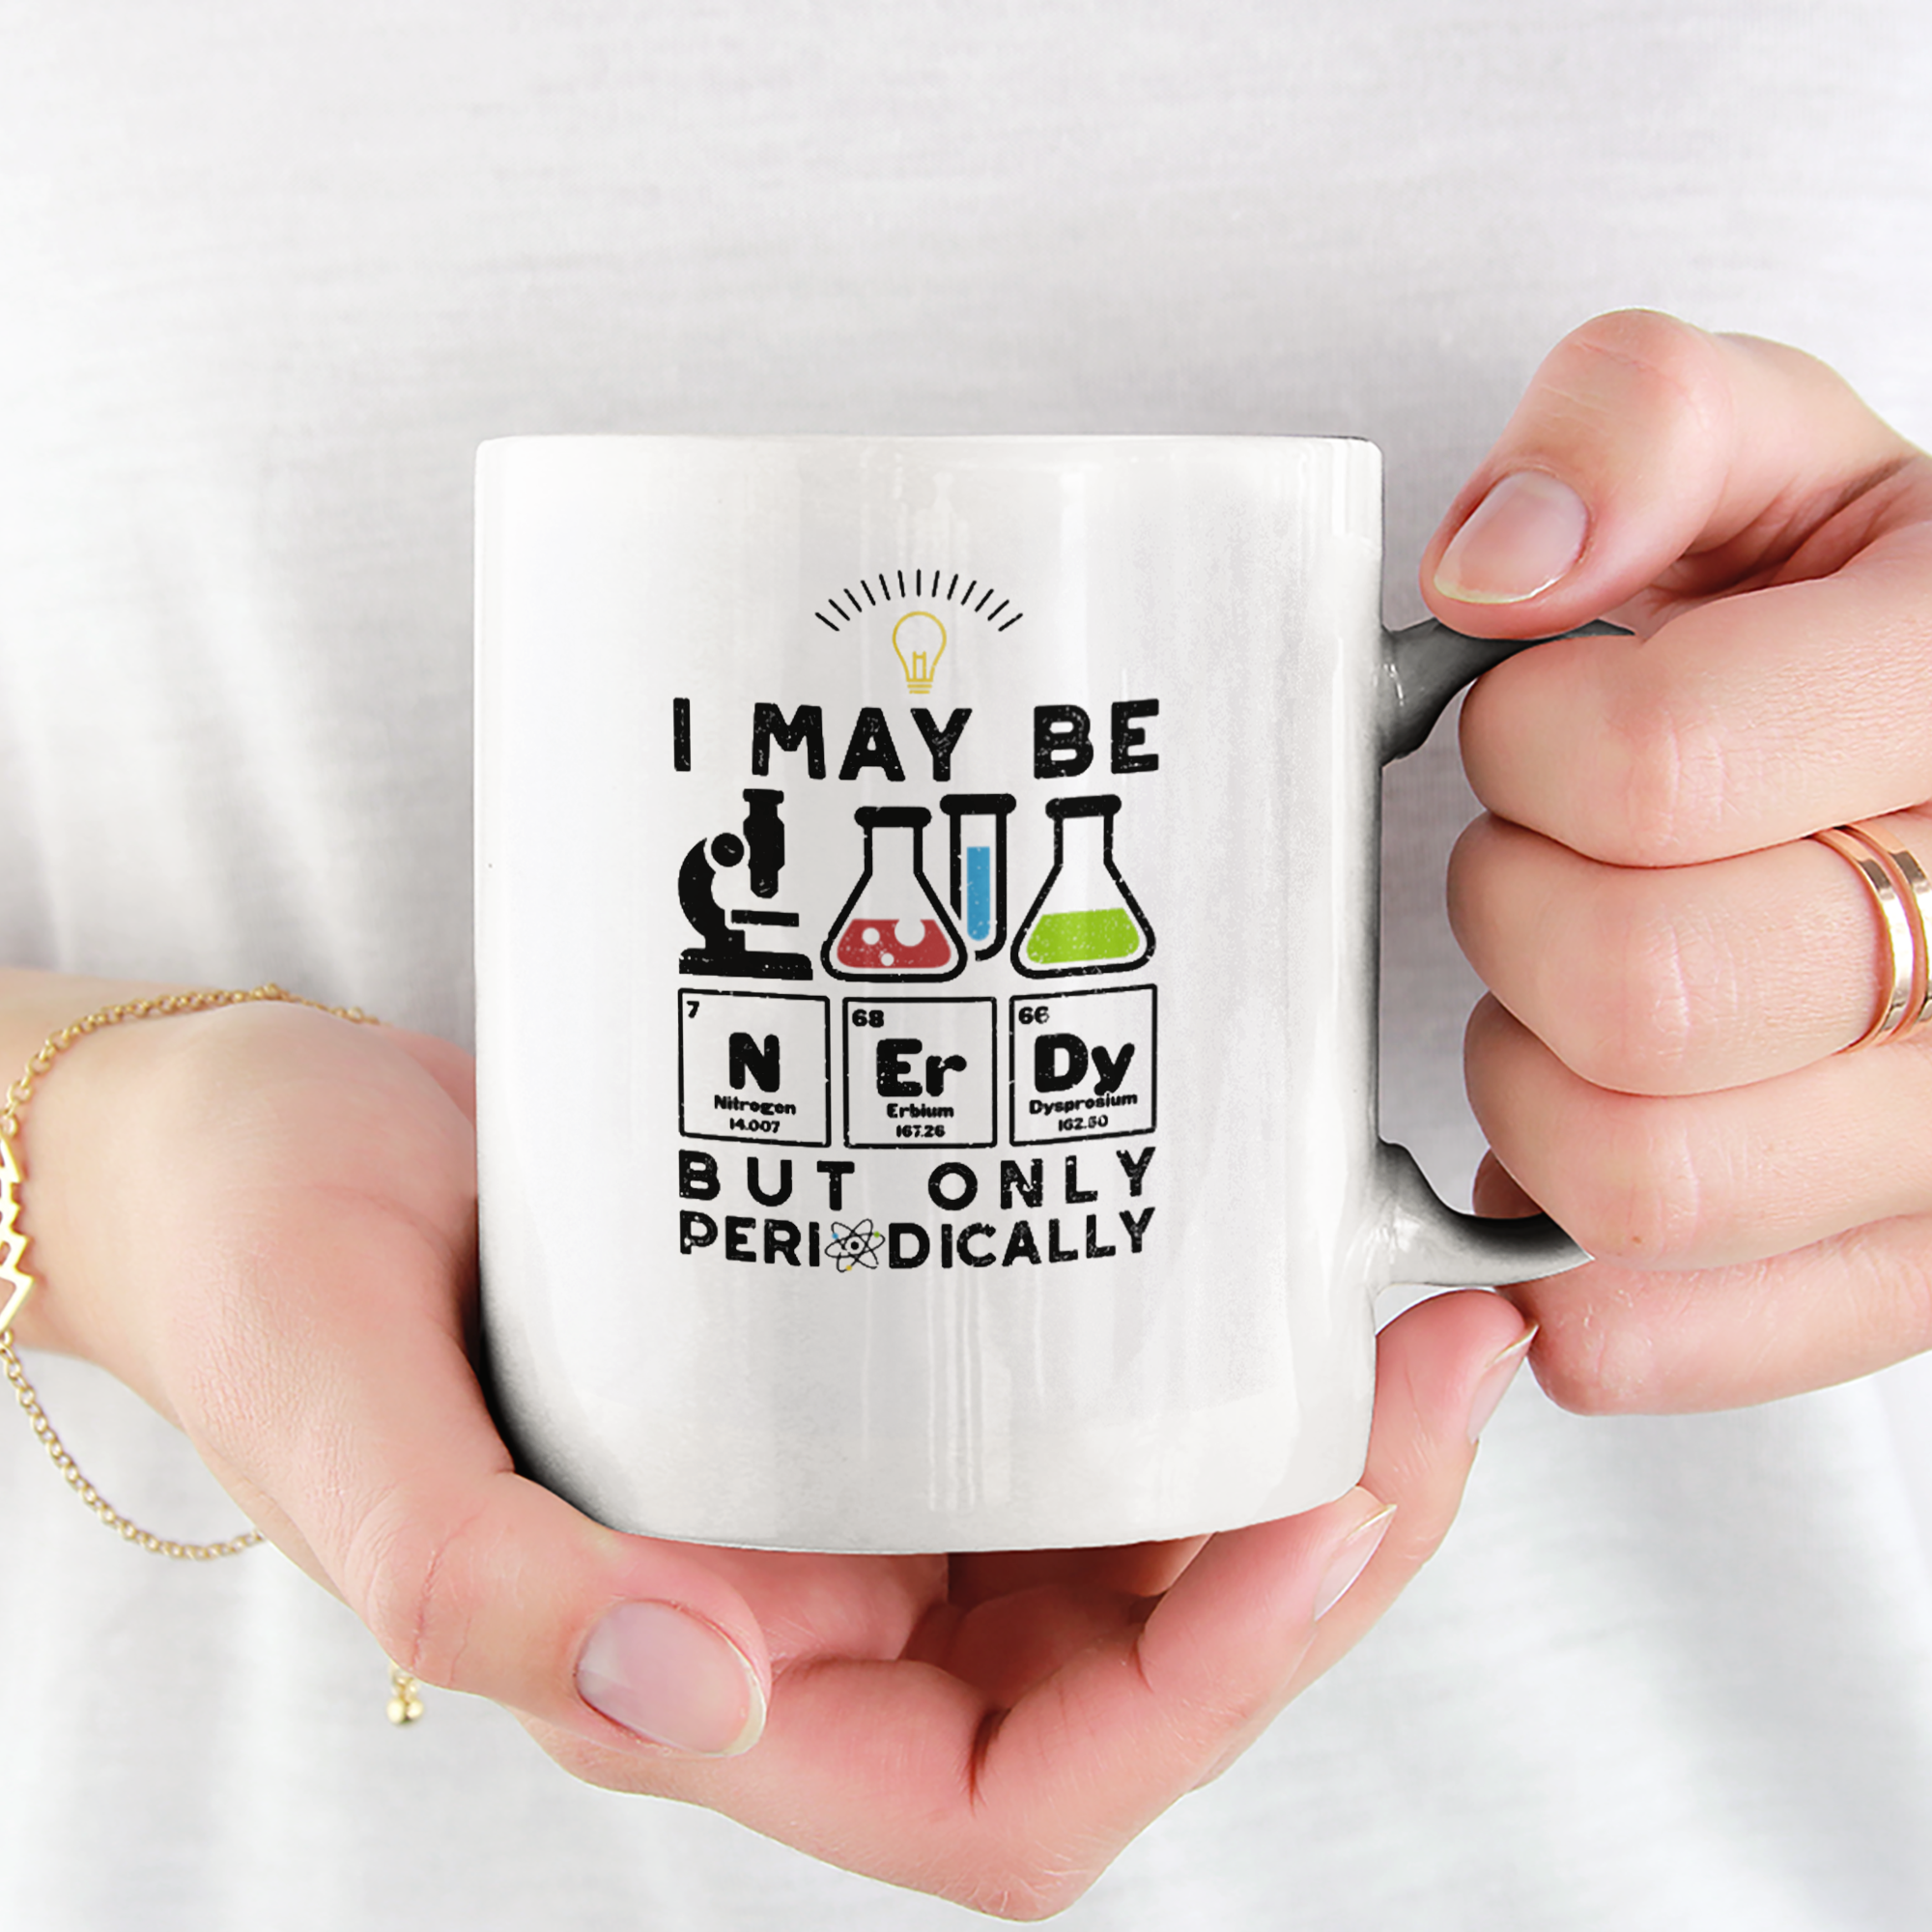 I May Be NErDy But Only Periodically Tasse - DESIGNSBYJNK5.COM